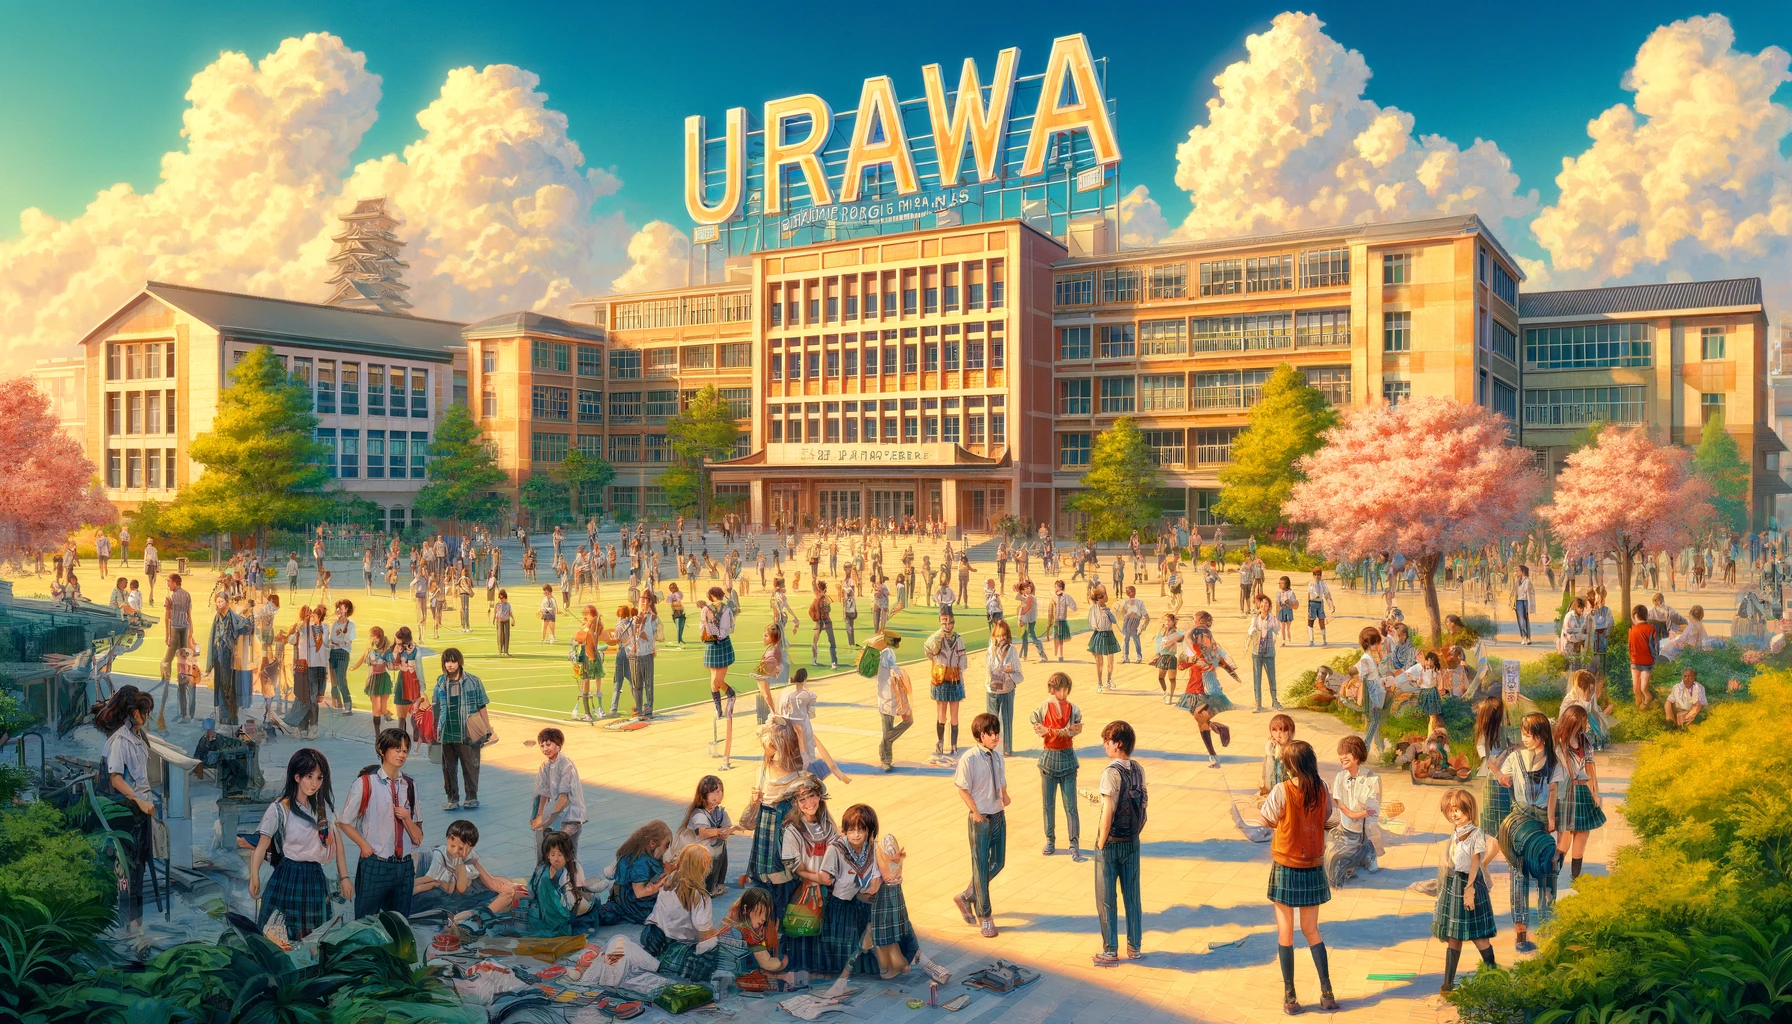 A vibrant high school campus scene showing the popularity of Urawai High School in Japan, with the word 'Urawa' prominently displayed in the sky. The image features a diverse group of students of various Asian descents, wearing colorful school uniforms, engaged in various outdoor activities. Students are depicted socializing, studying, and participating in sports on a spacious campus with a mix of modern and traditional architectural styles. The campus is lush with greenery and cherry trees in bloom, adding to the lively atmosphere. The scene is bustling, portraying a well-liked and active school environment.